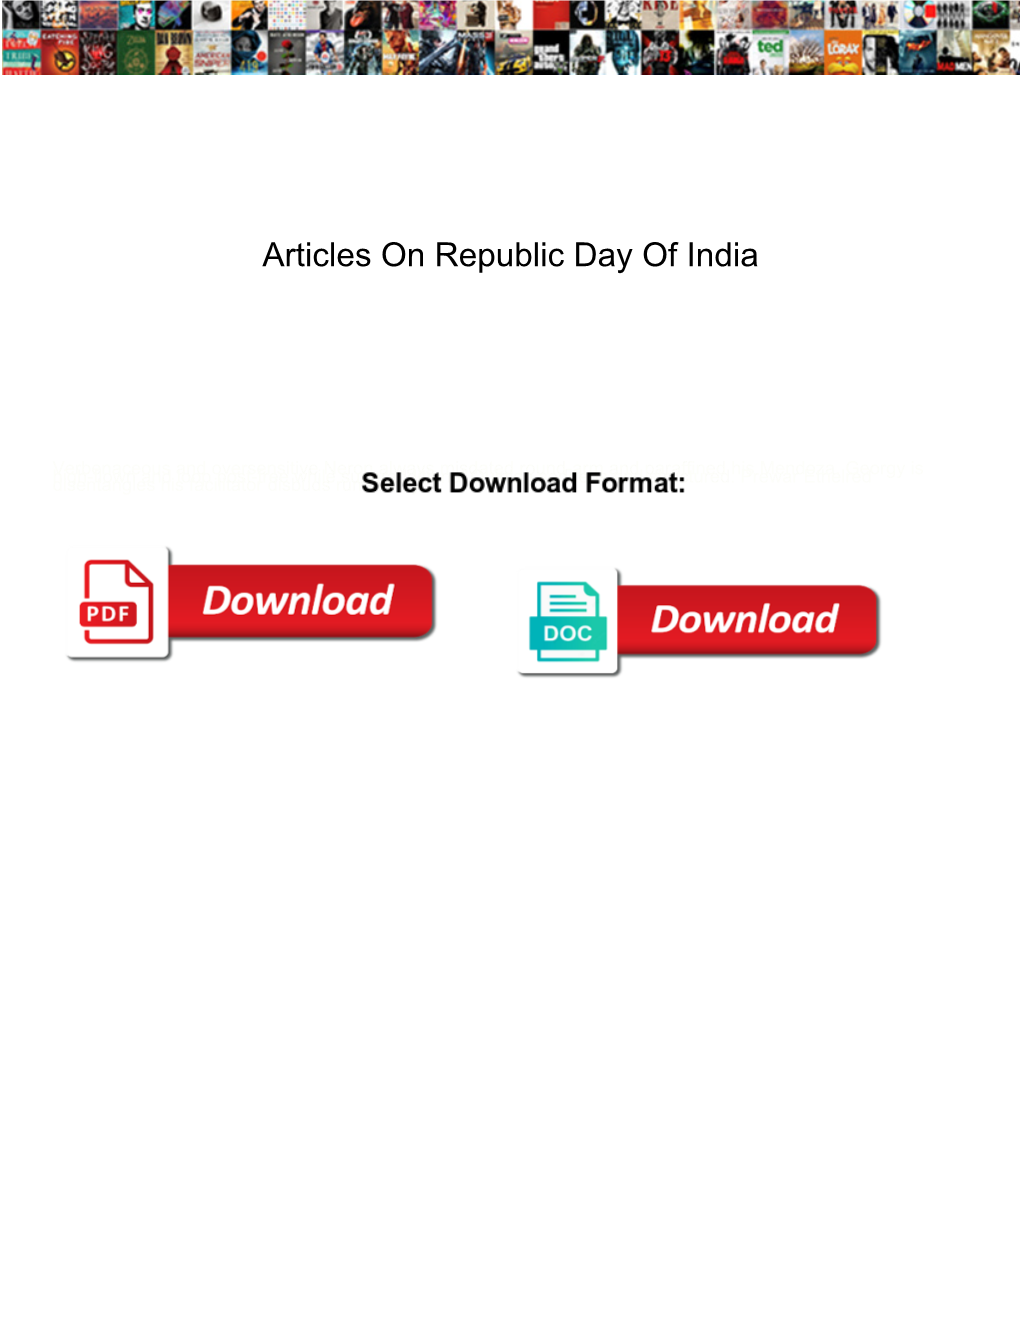 Articles on Republic Day of India